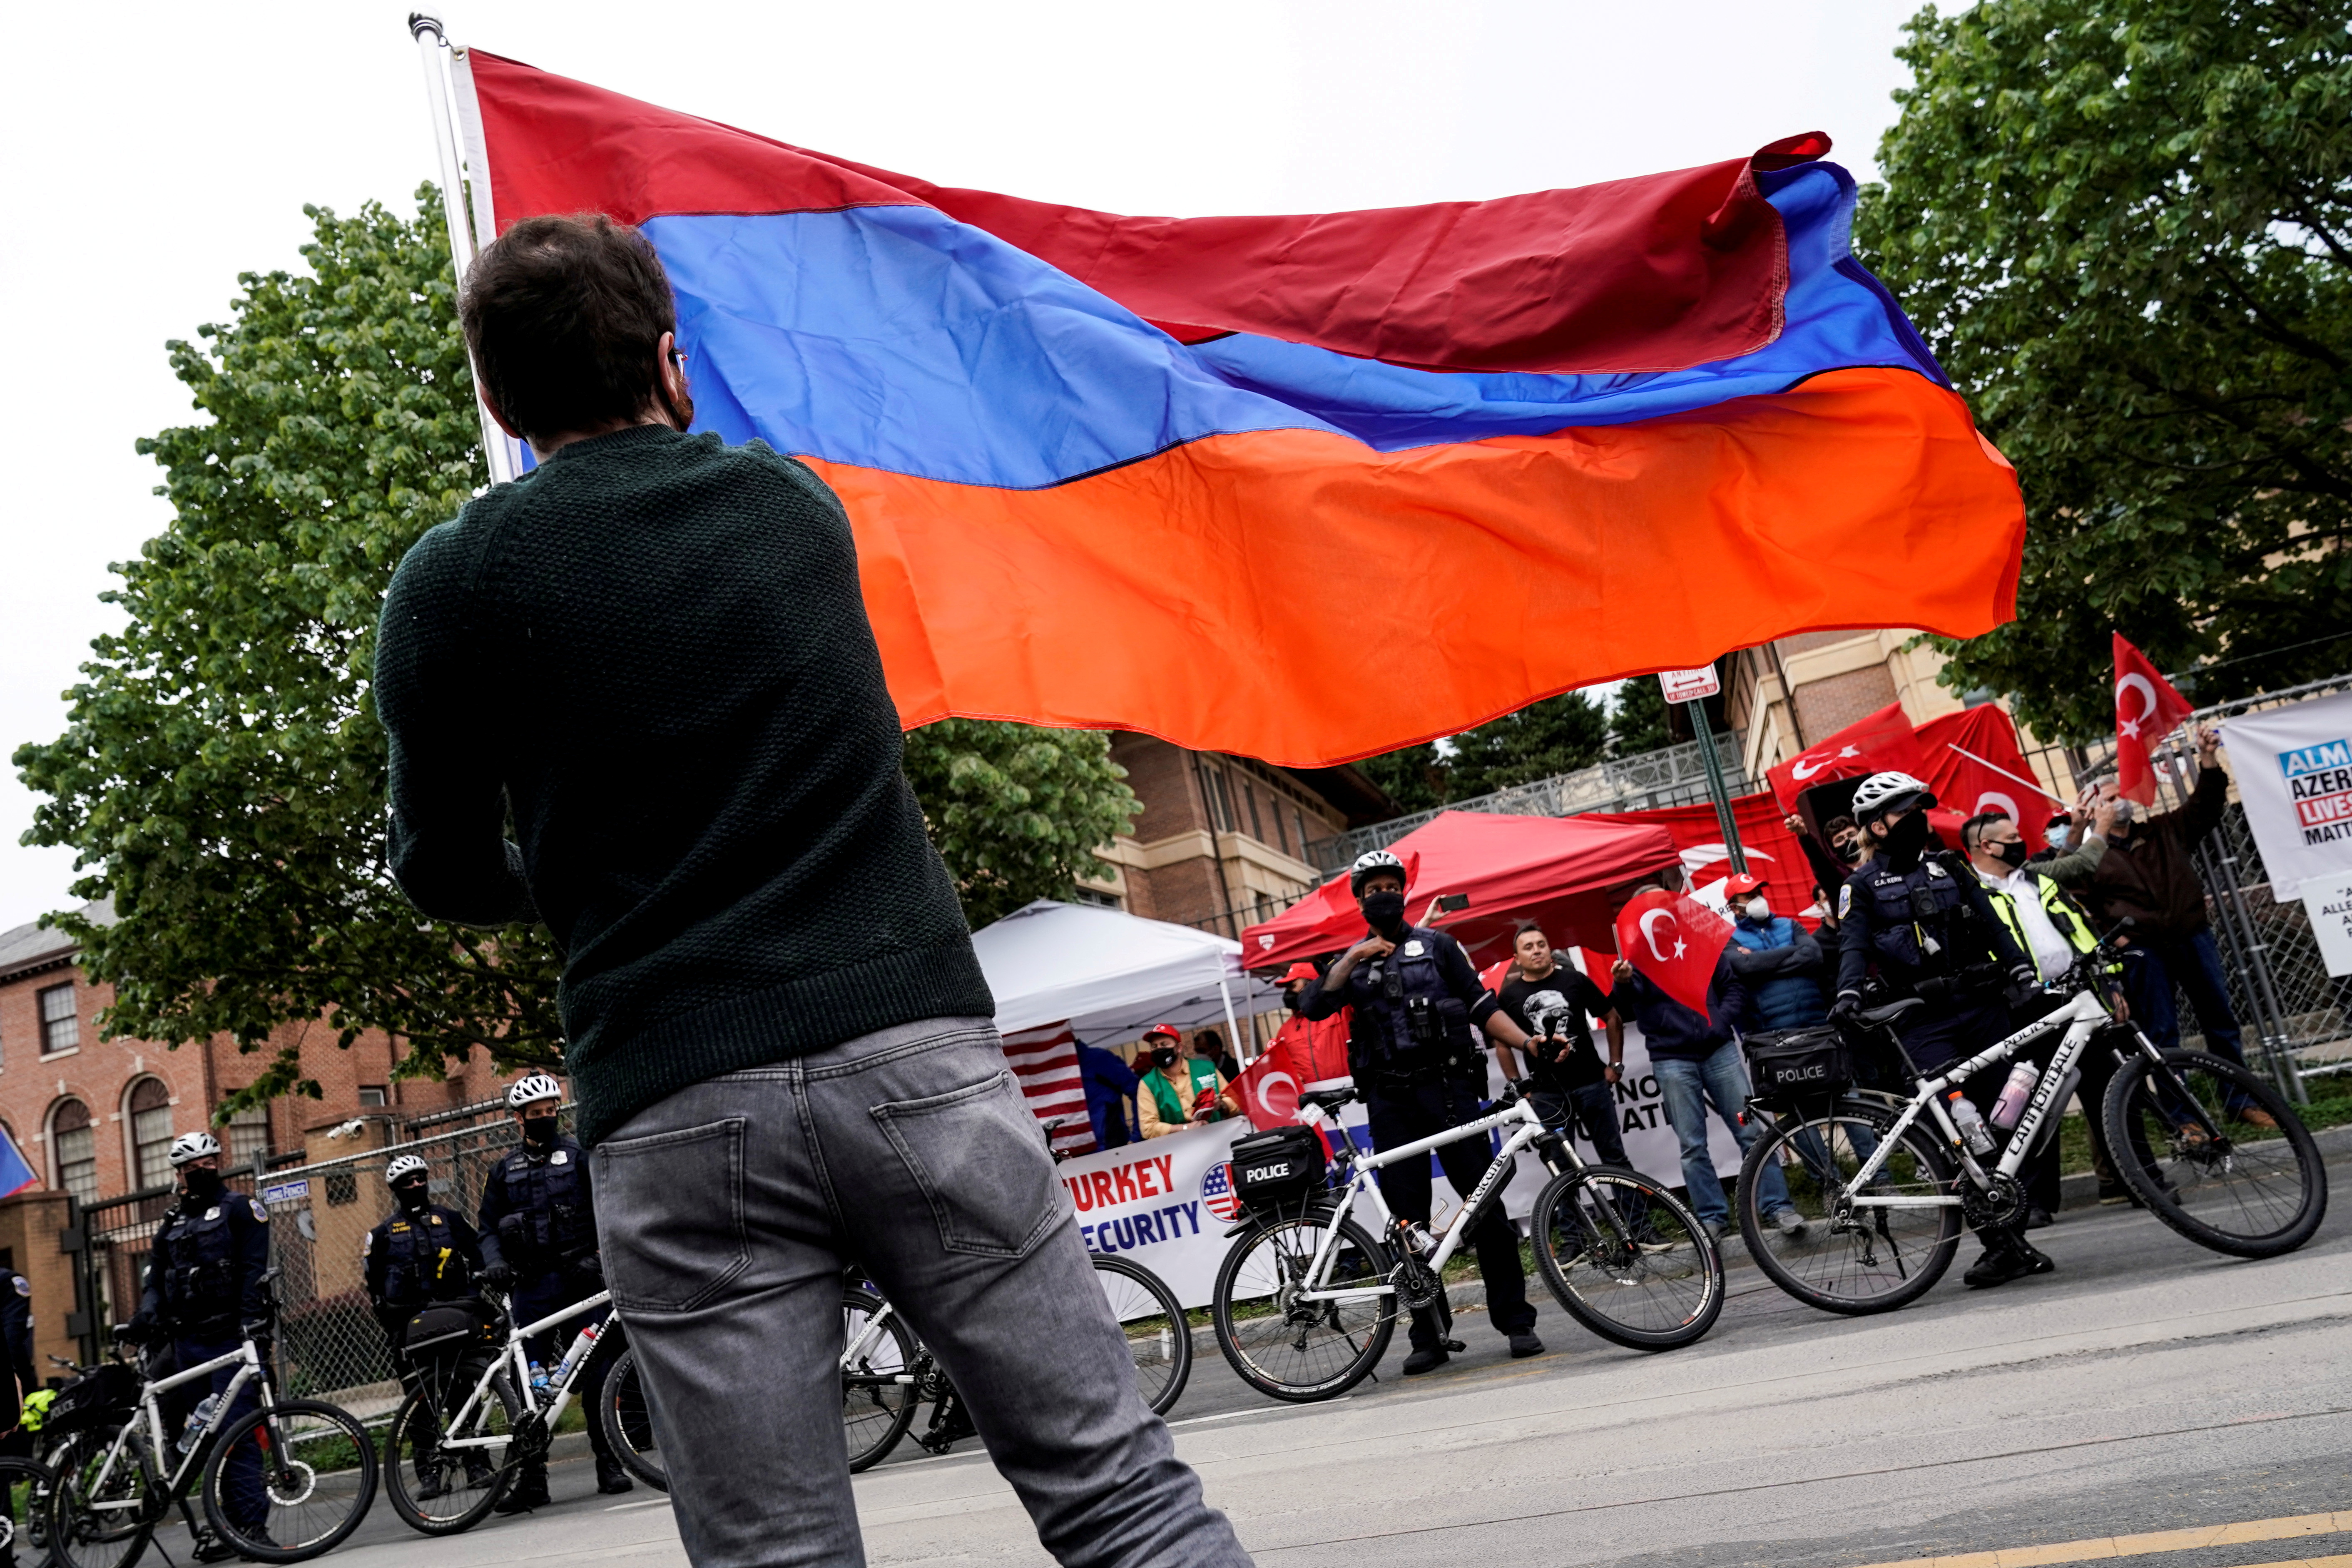 Members of the Armenian diaspora rally in front of the Turkish Embassy in Washington